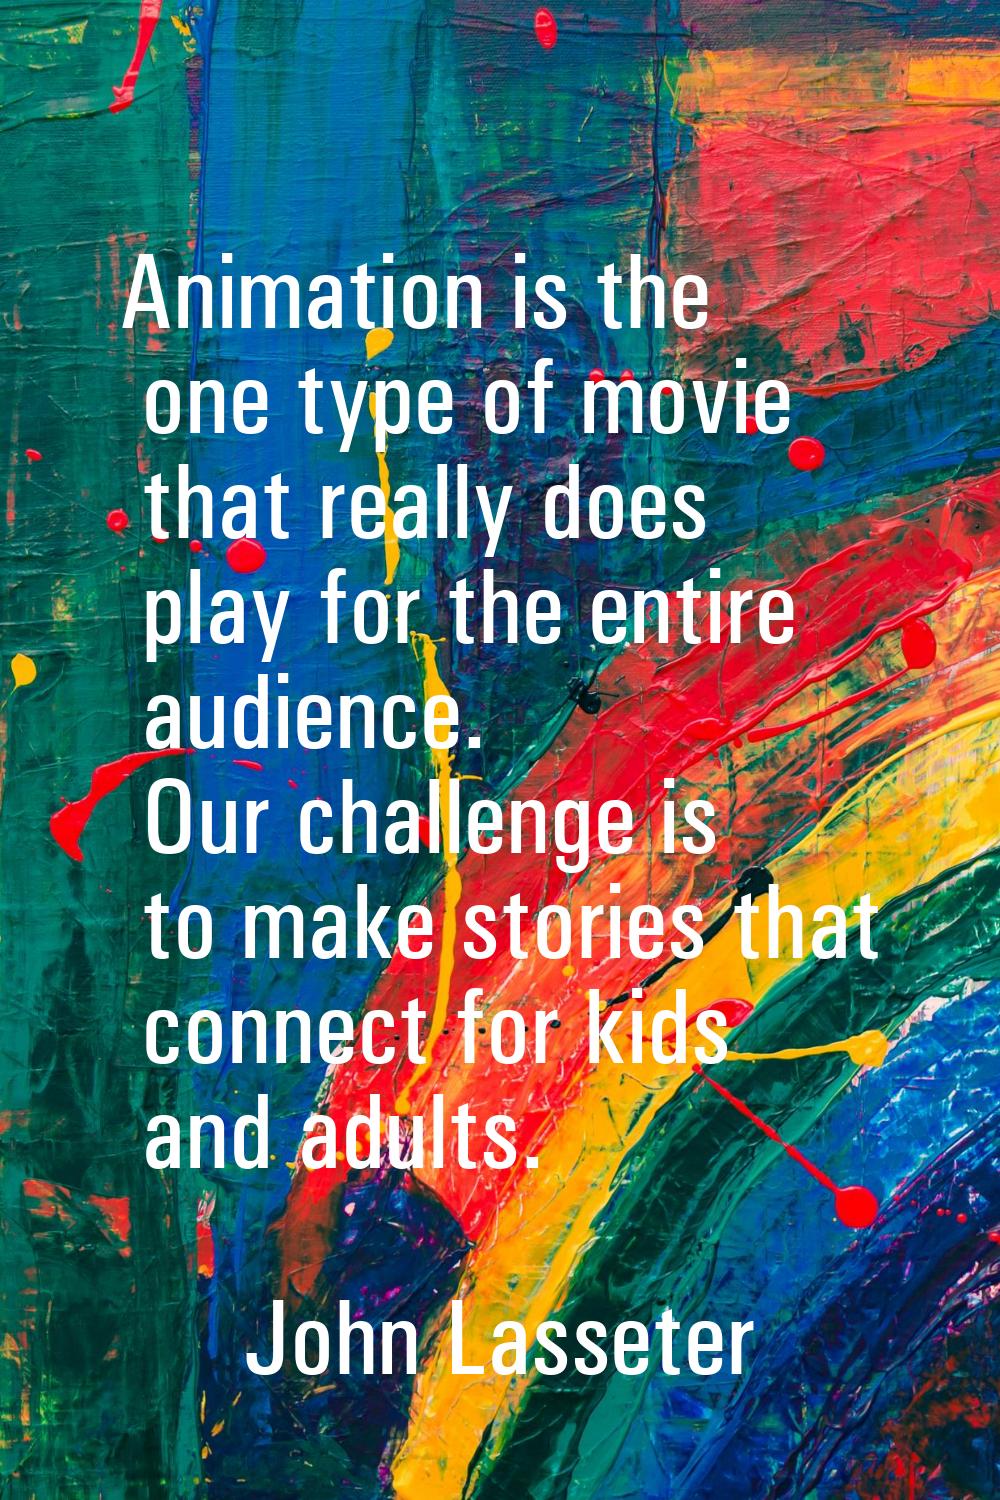 Animation is the one type of movie that really does play for the entire audience. Our challenge is 